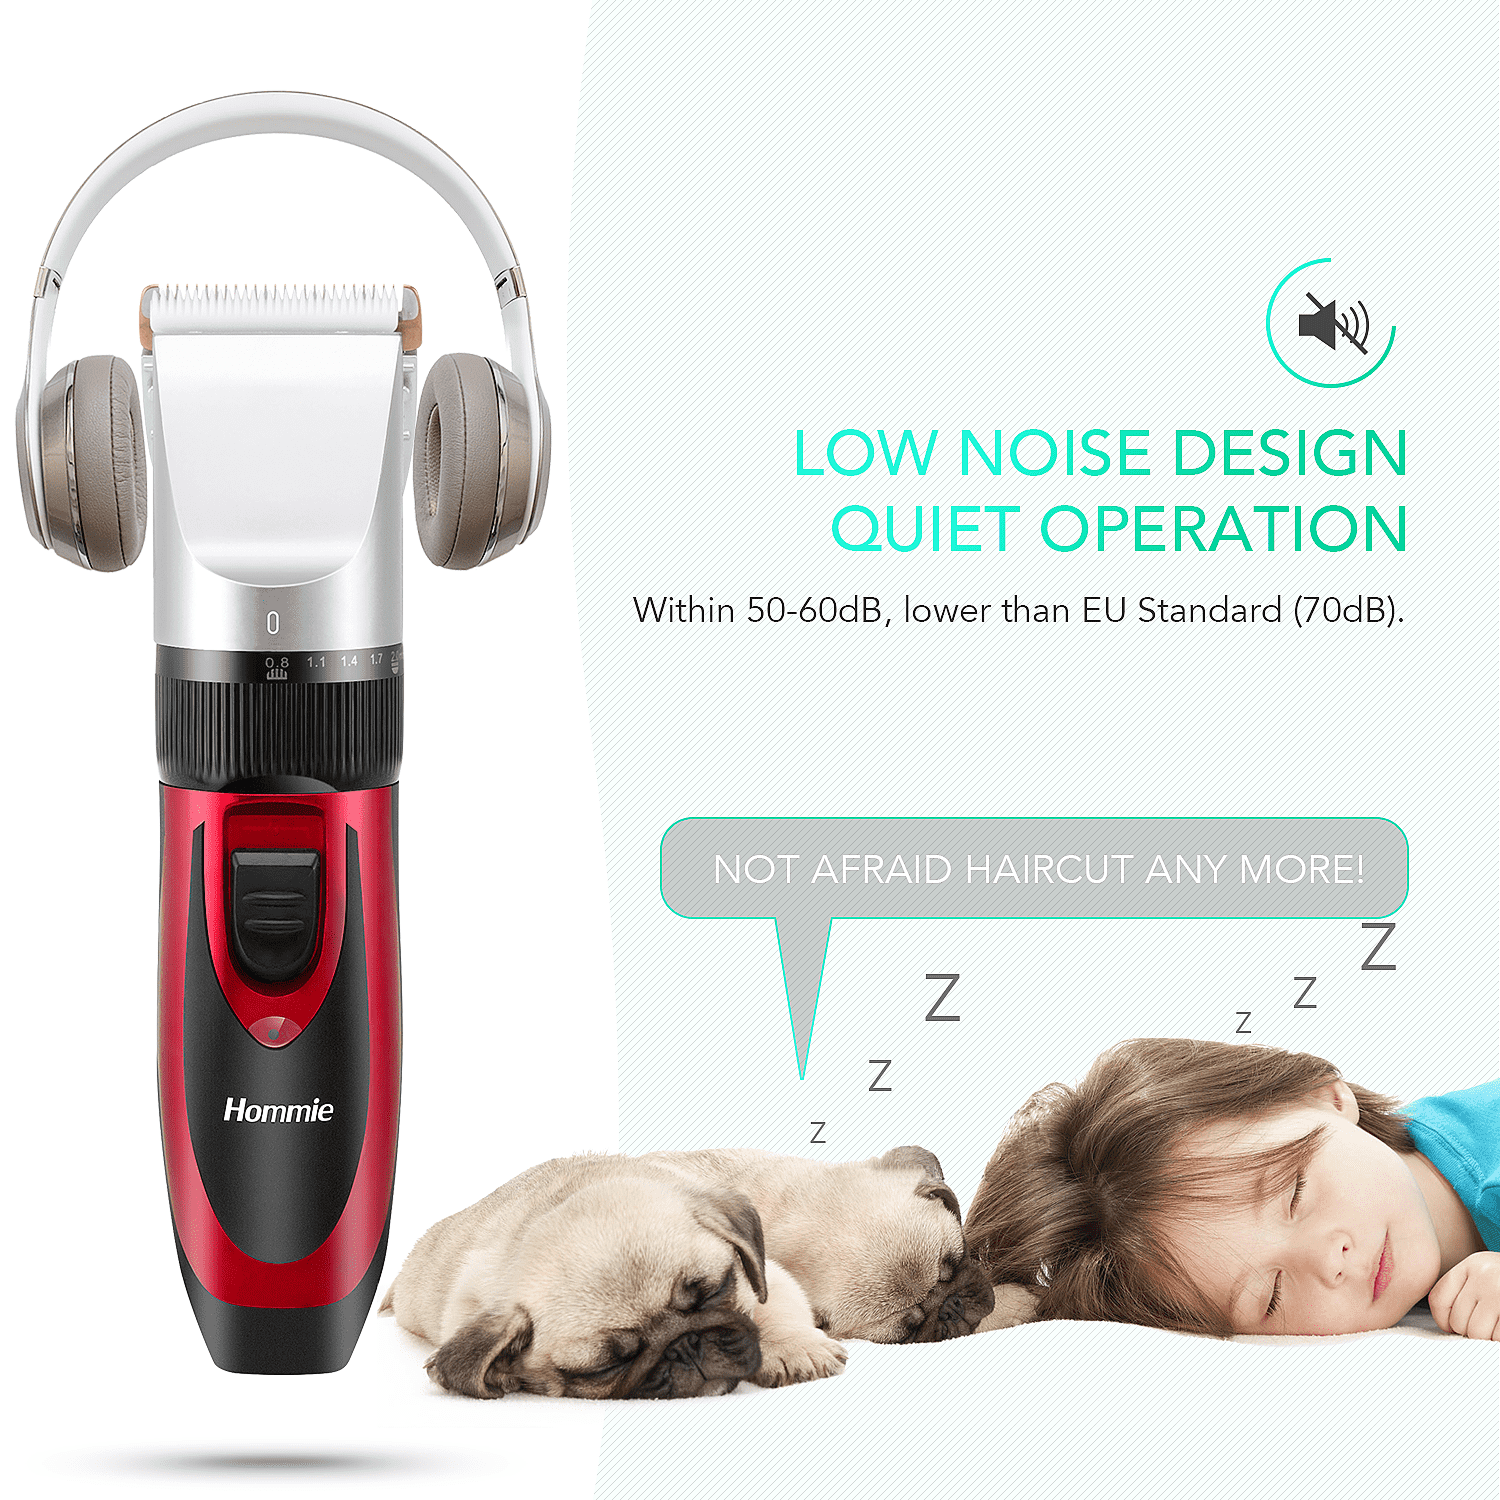 USB Rechargeable Dog Shaver Rabbits. 2 in 1 Dog Grooming Clippers Wireless Kit with Double Blades Hommie Pet Grooming Clipper S300, Rose Gold Clipper for Dogs Cats 